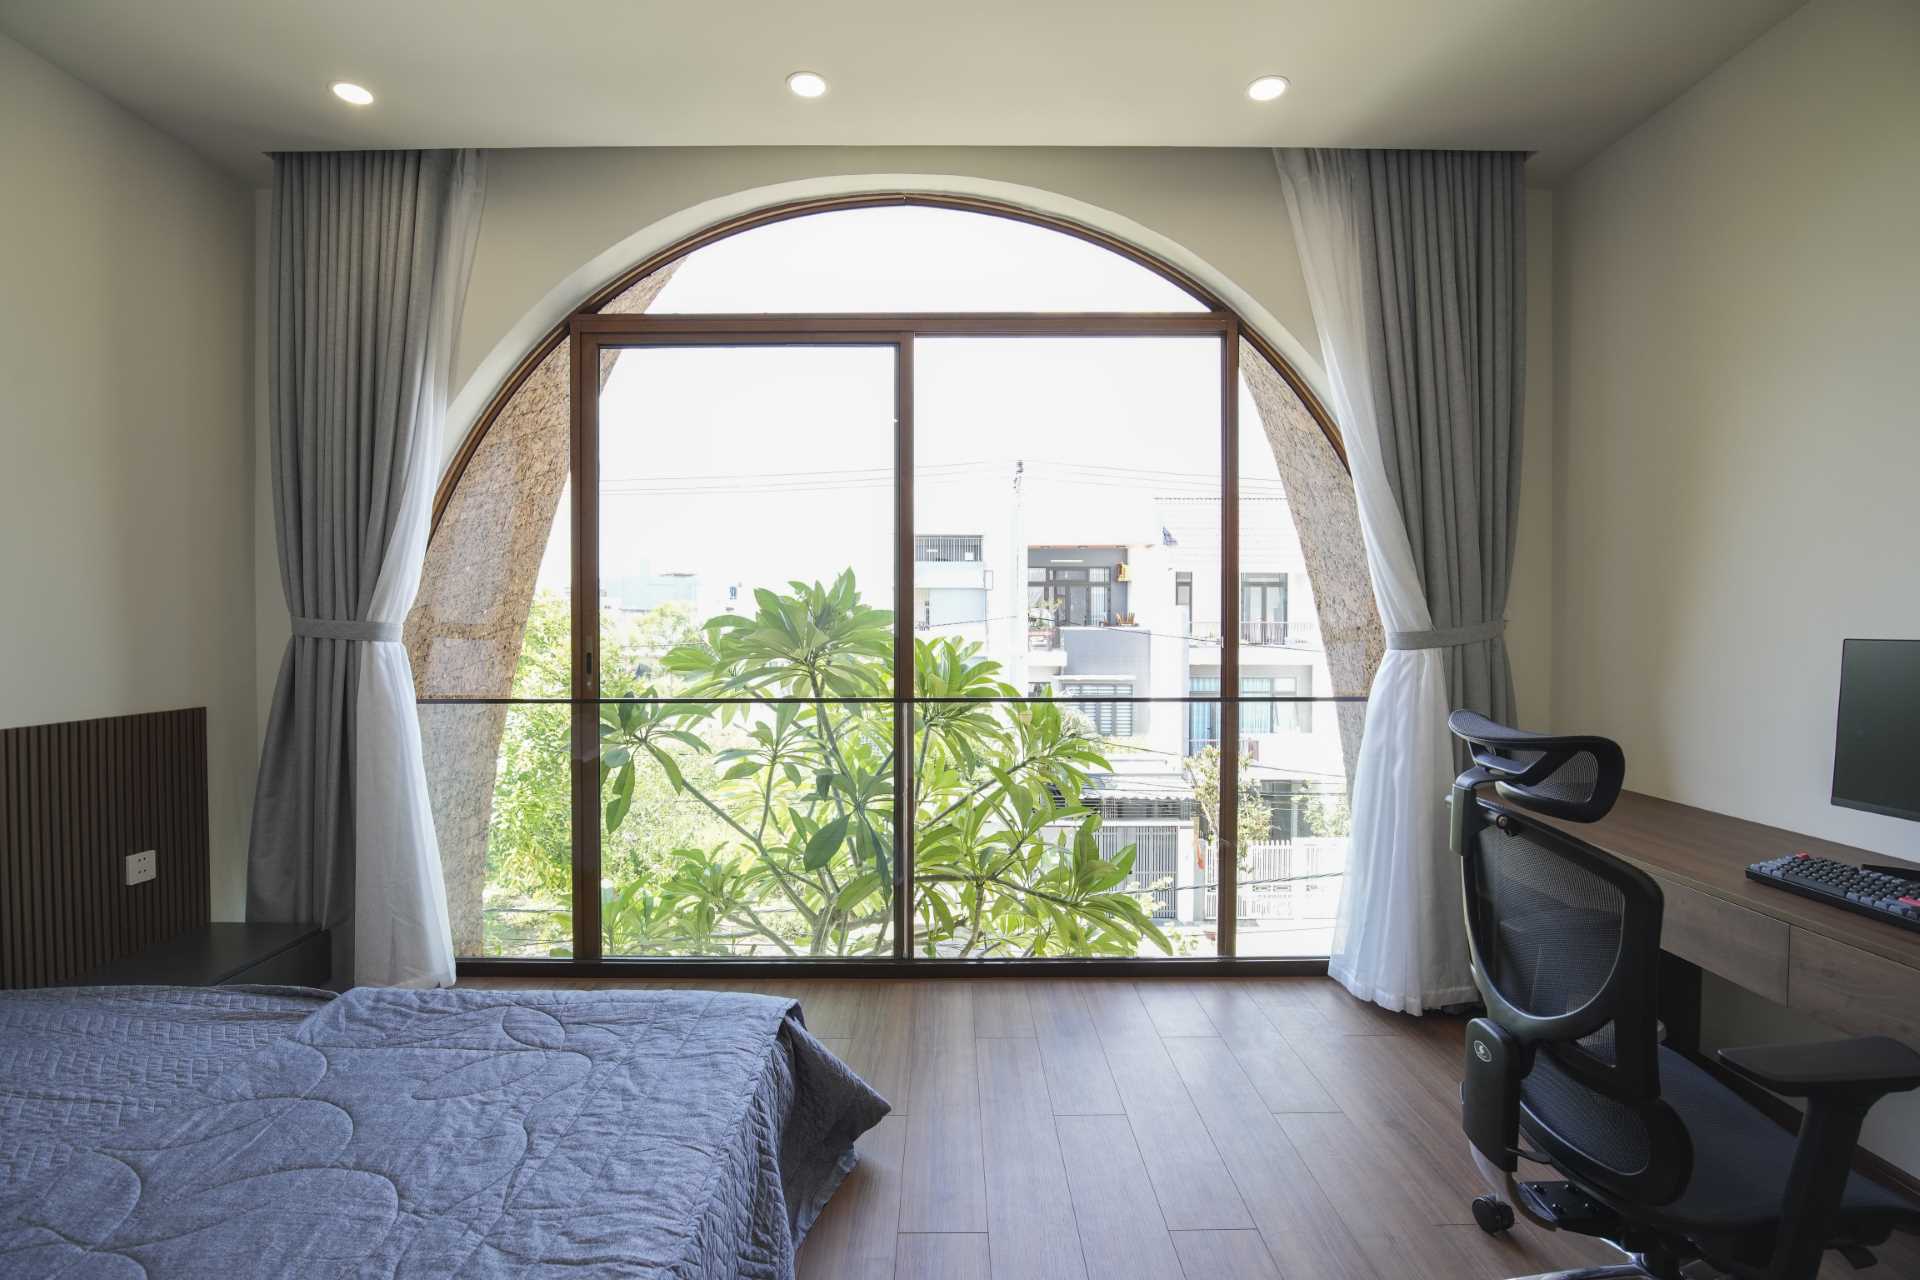 A simple bedroom with an arched window and a balcony.